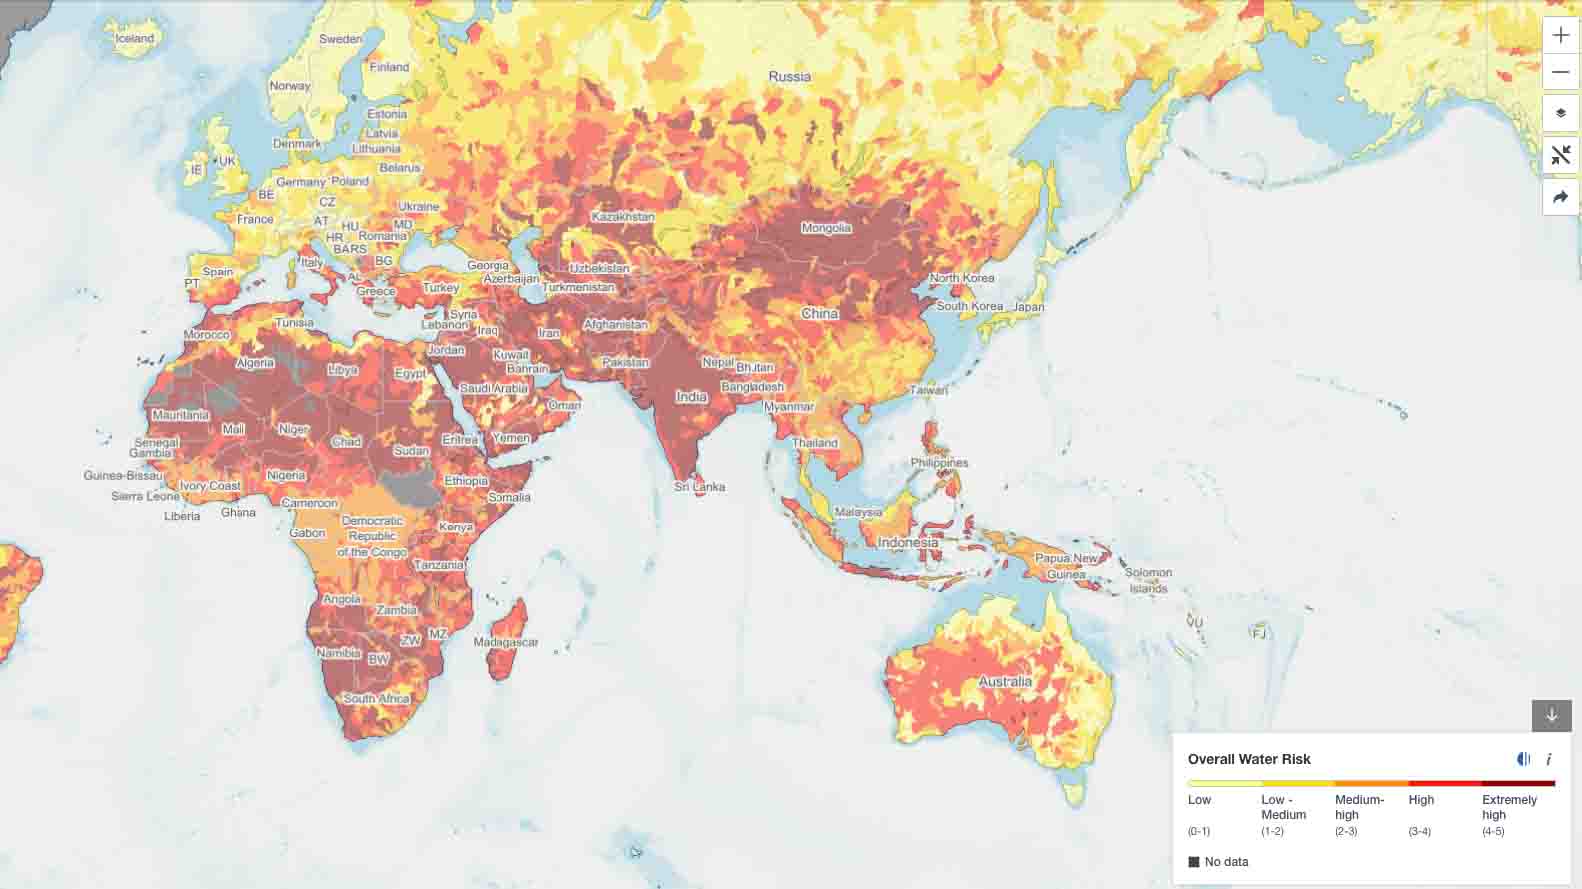 overall water risk atlas